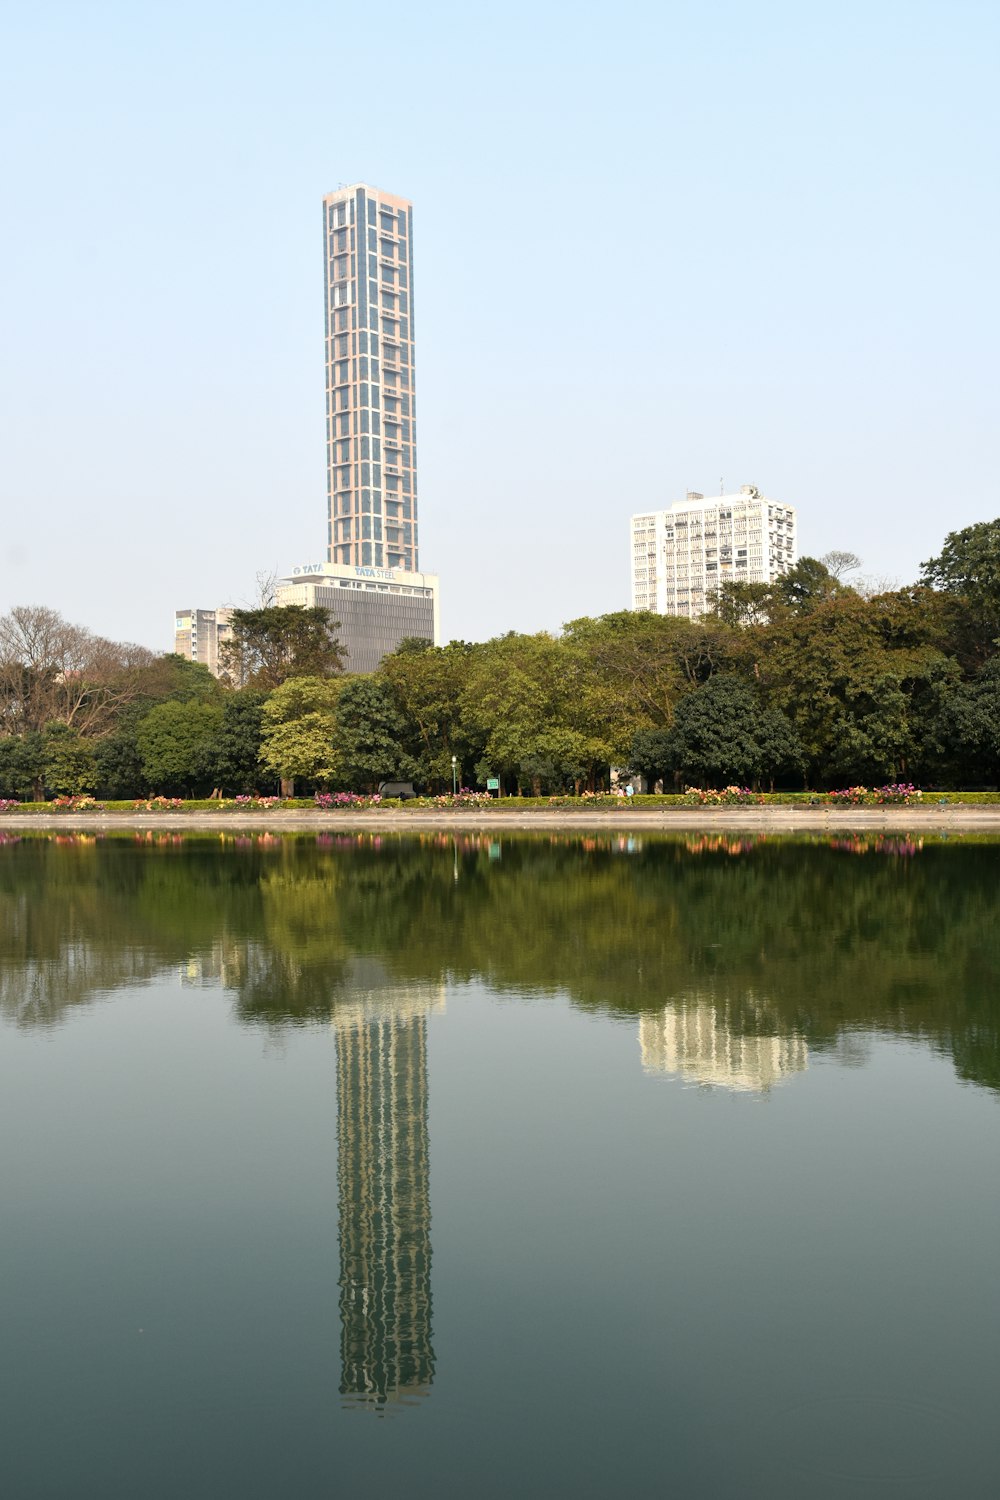 body of water near trees and buildings during daytime